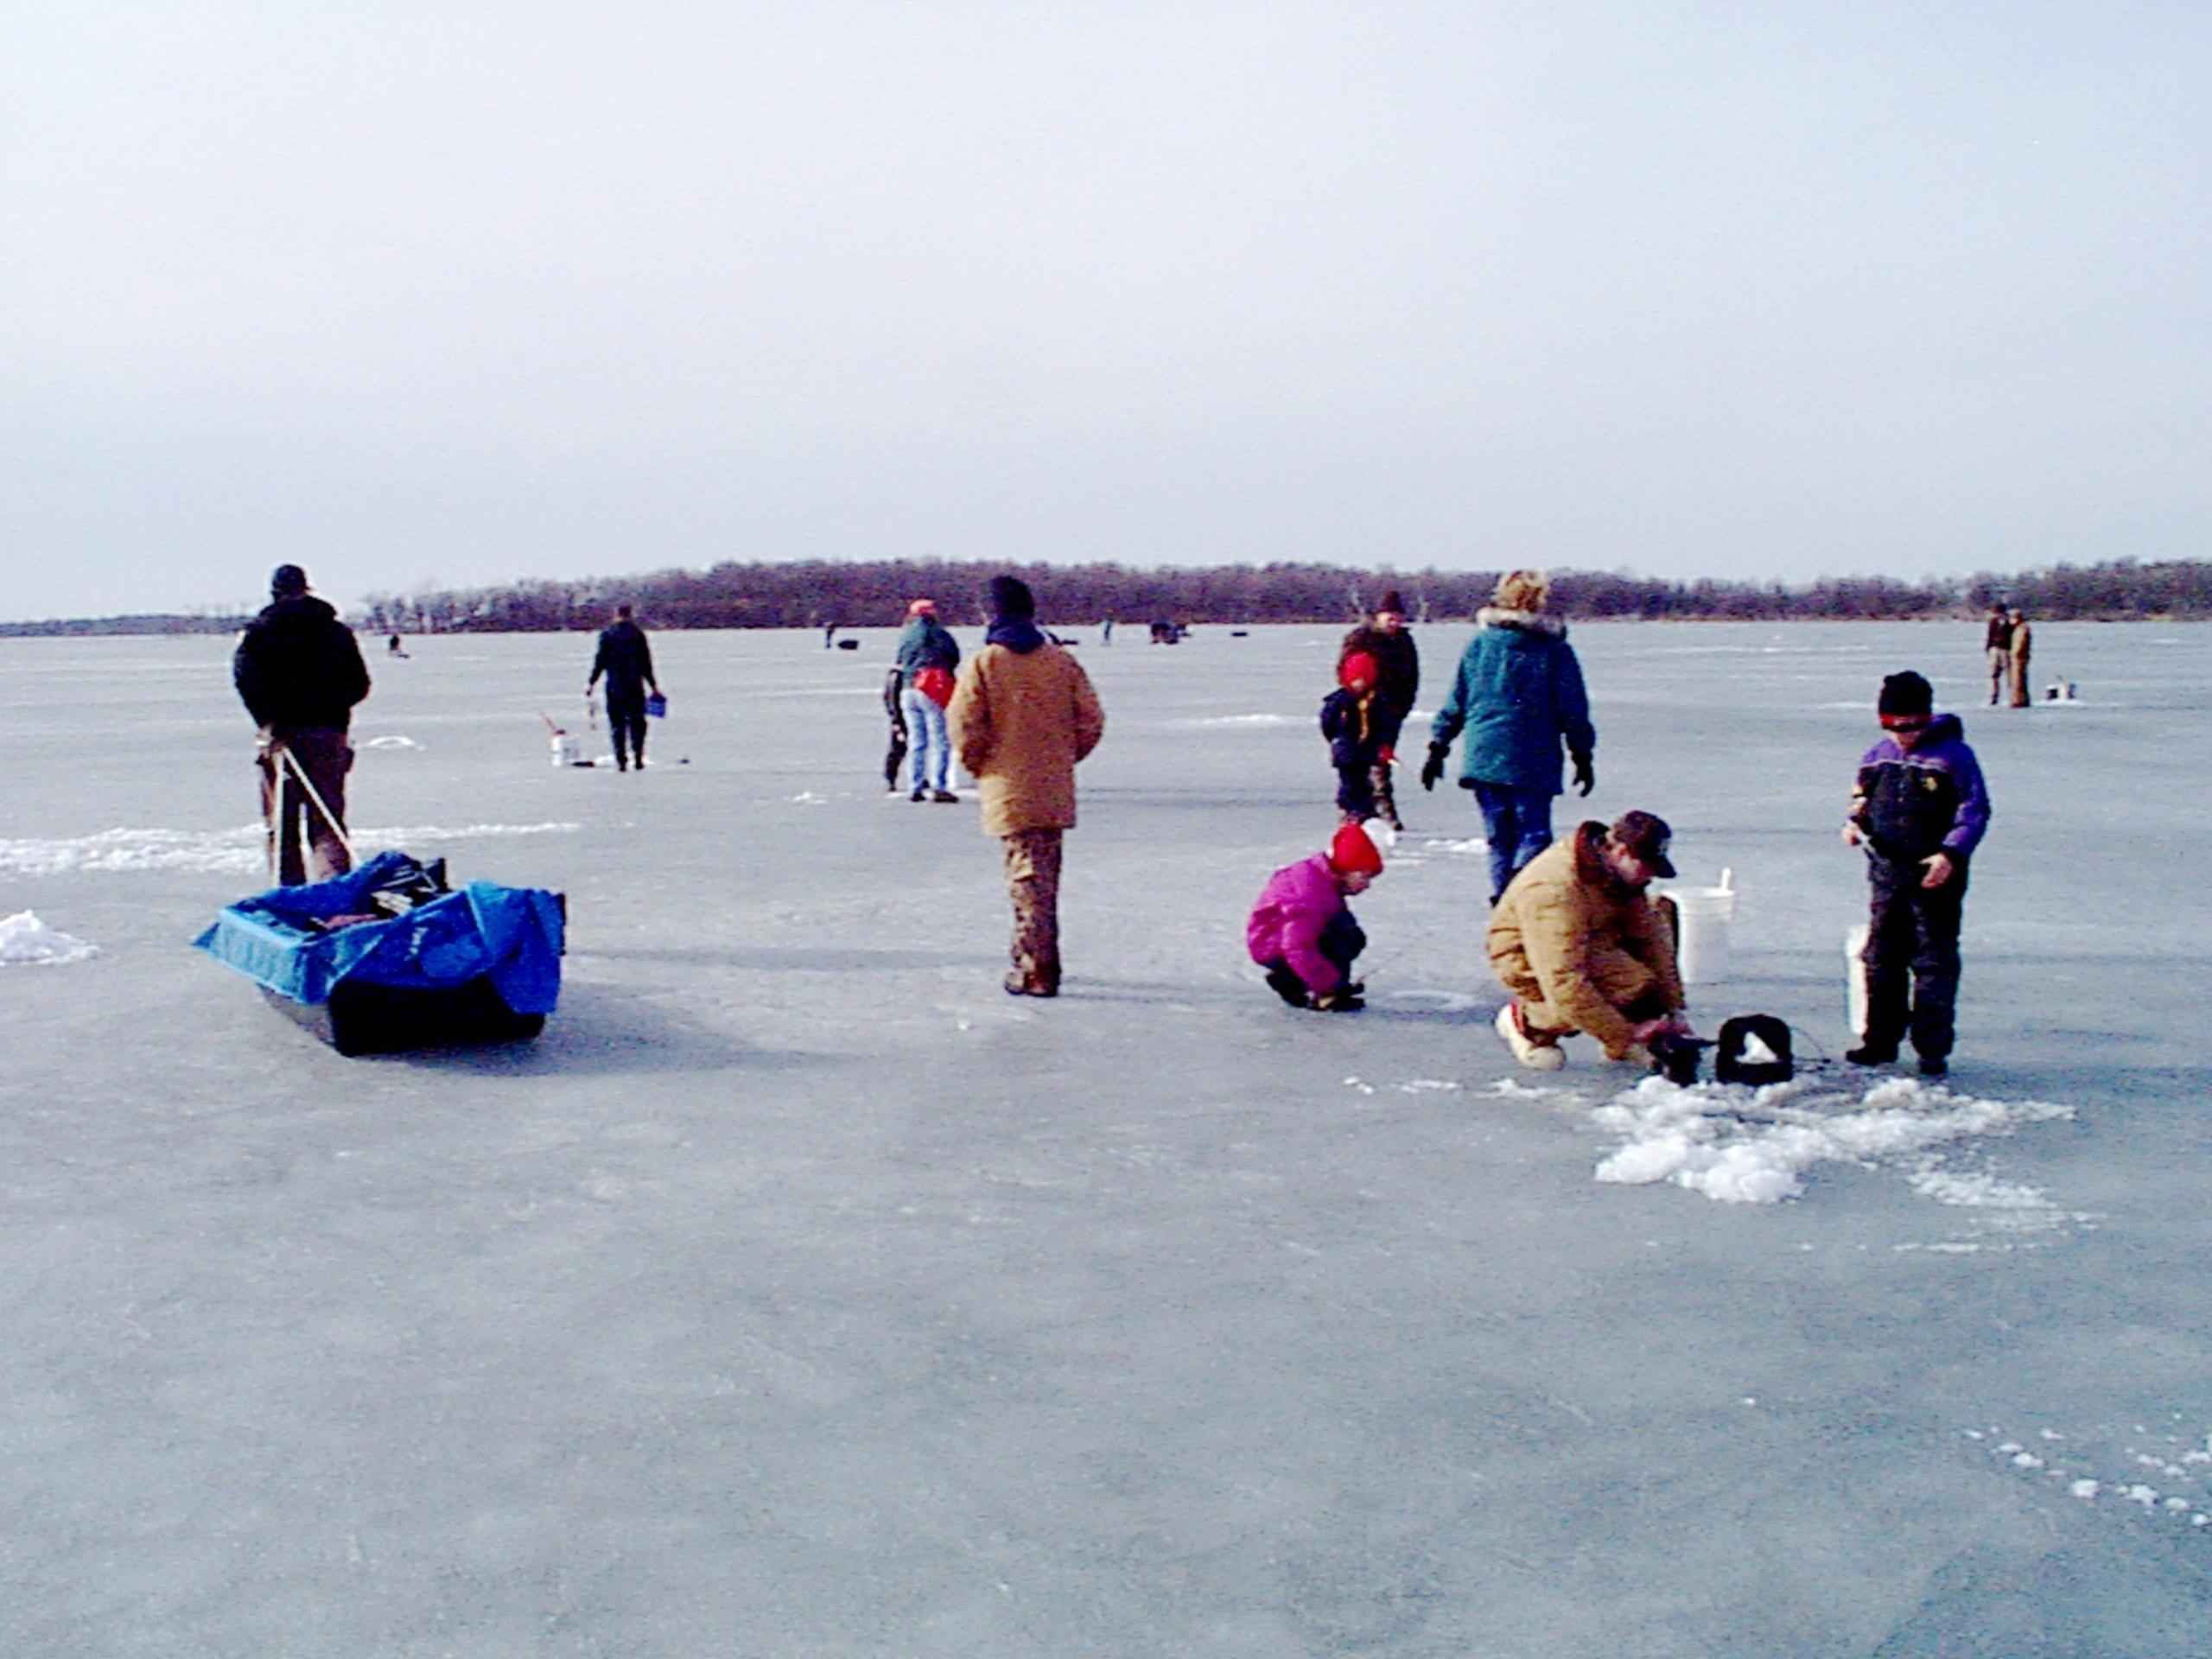 File:People on ice recreation and sport fishing on ice.jpg